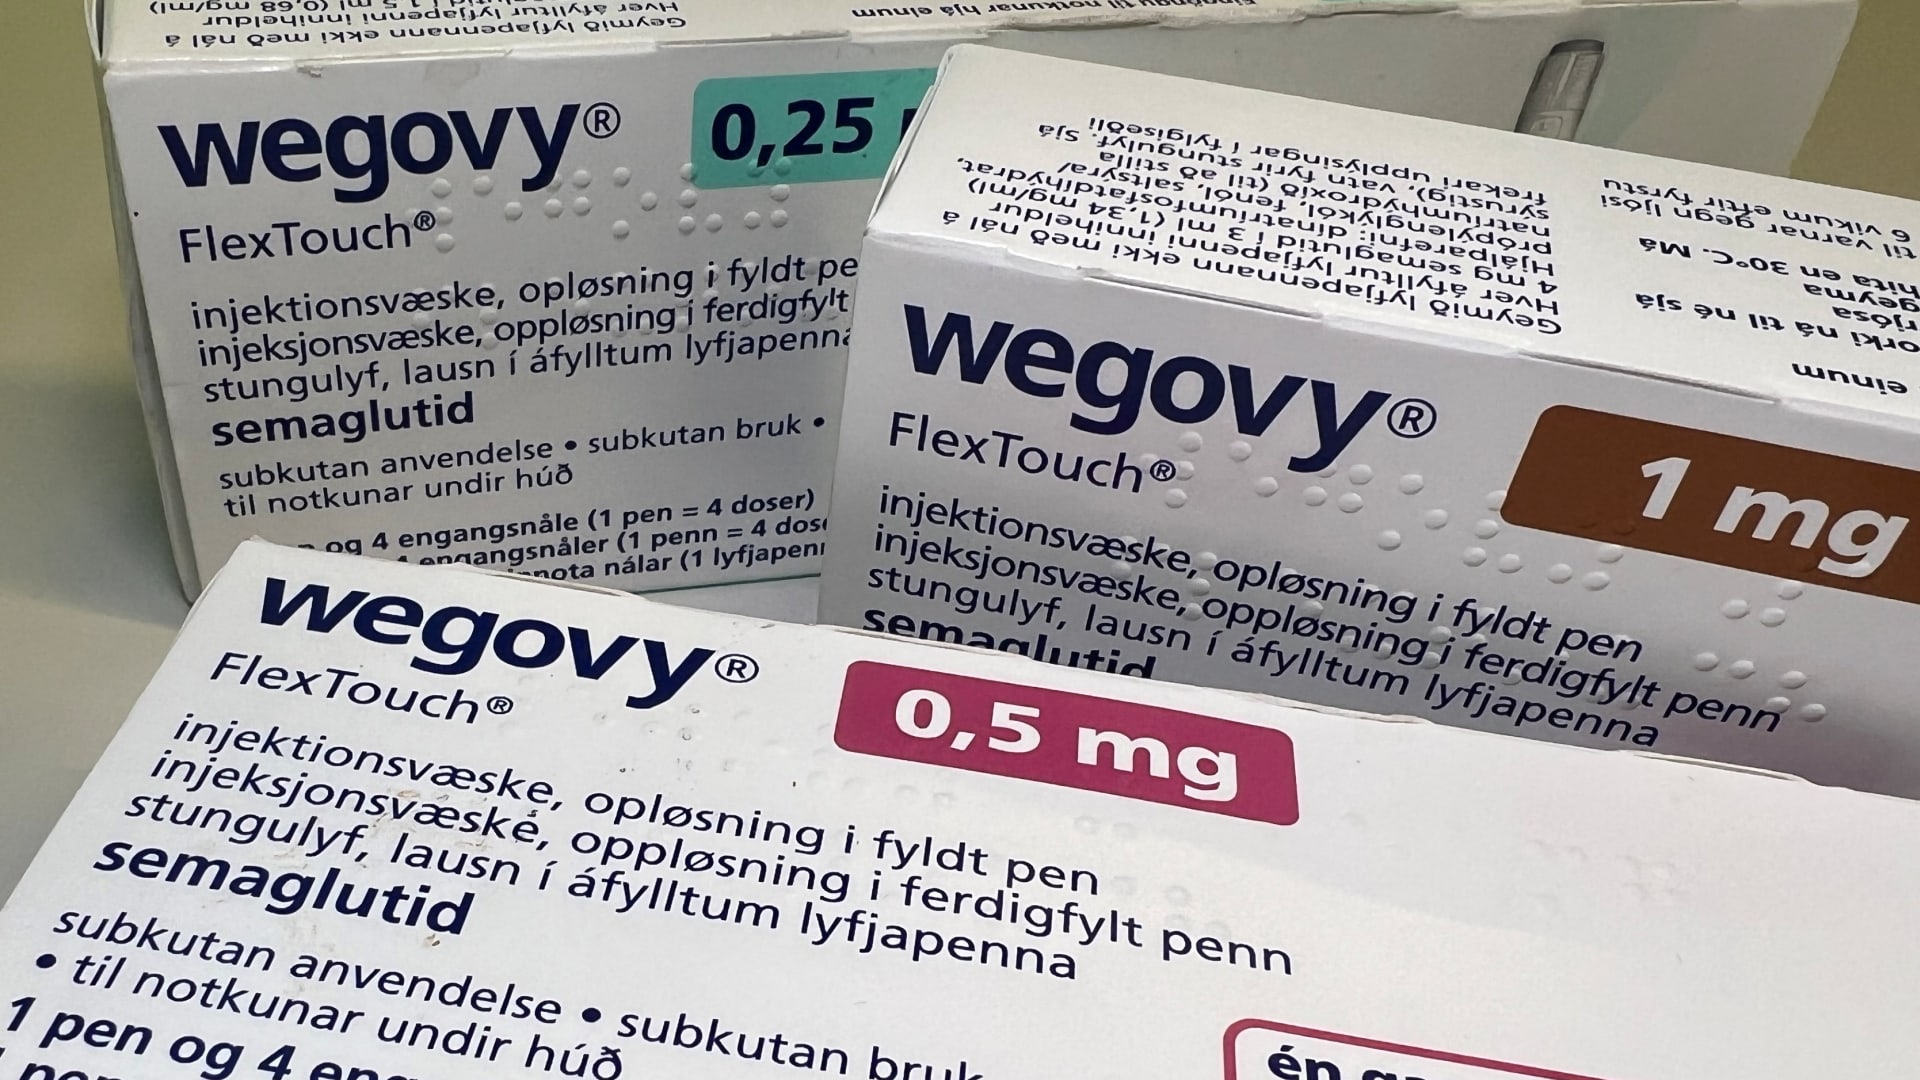 Novo Nordisk parent to buy Catalent for $16.5 billion to expand Wegovy supply